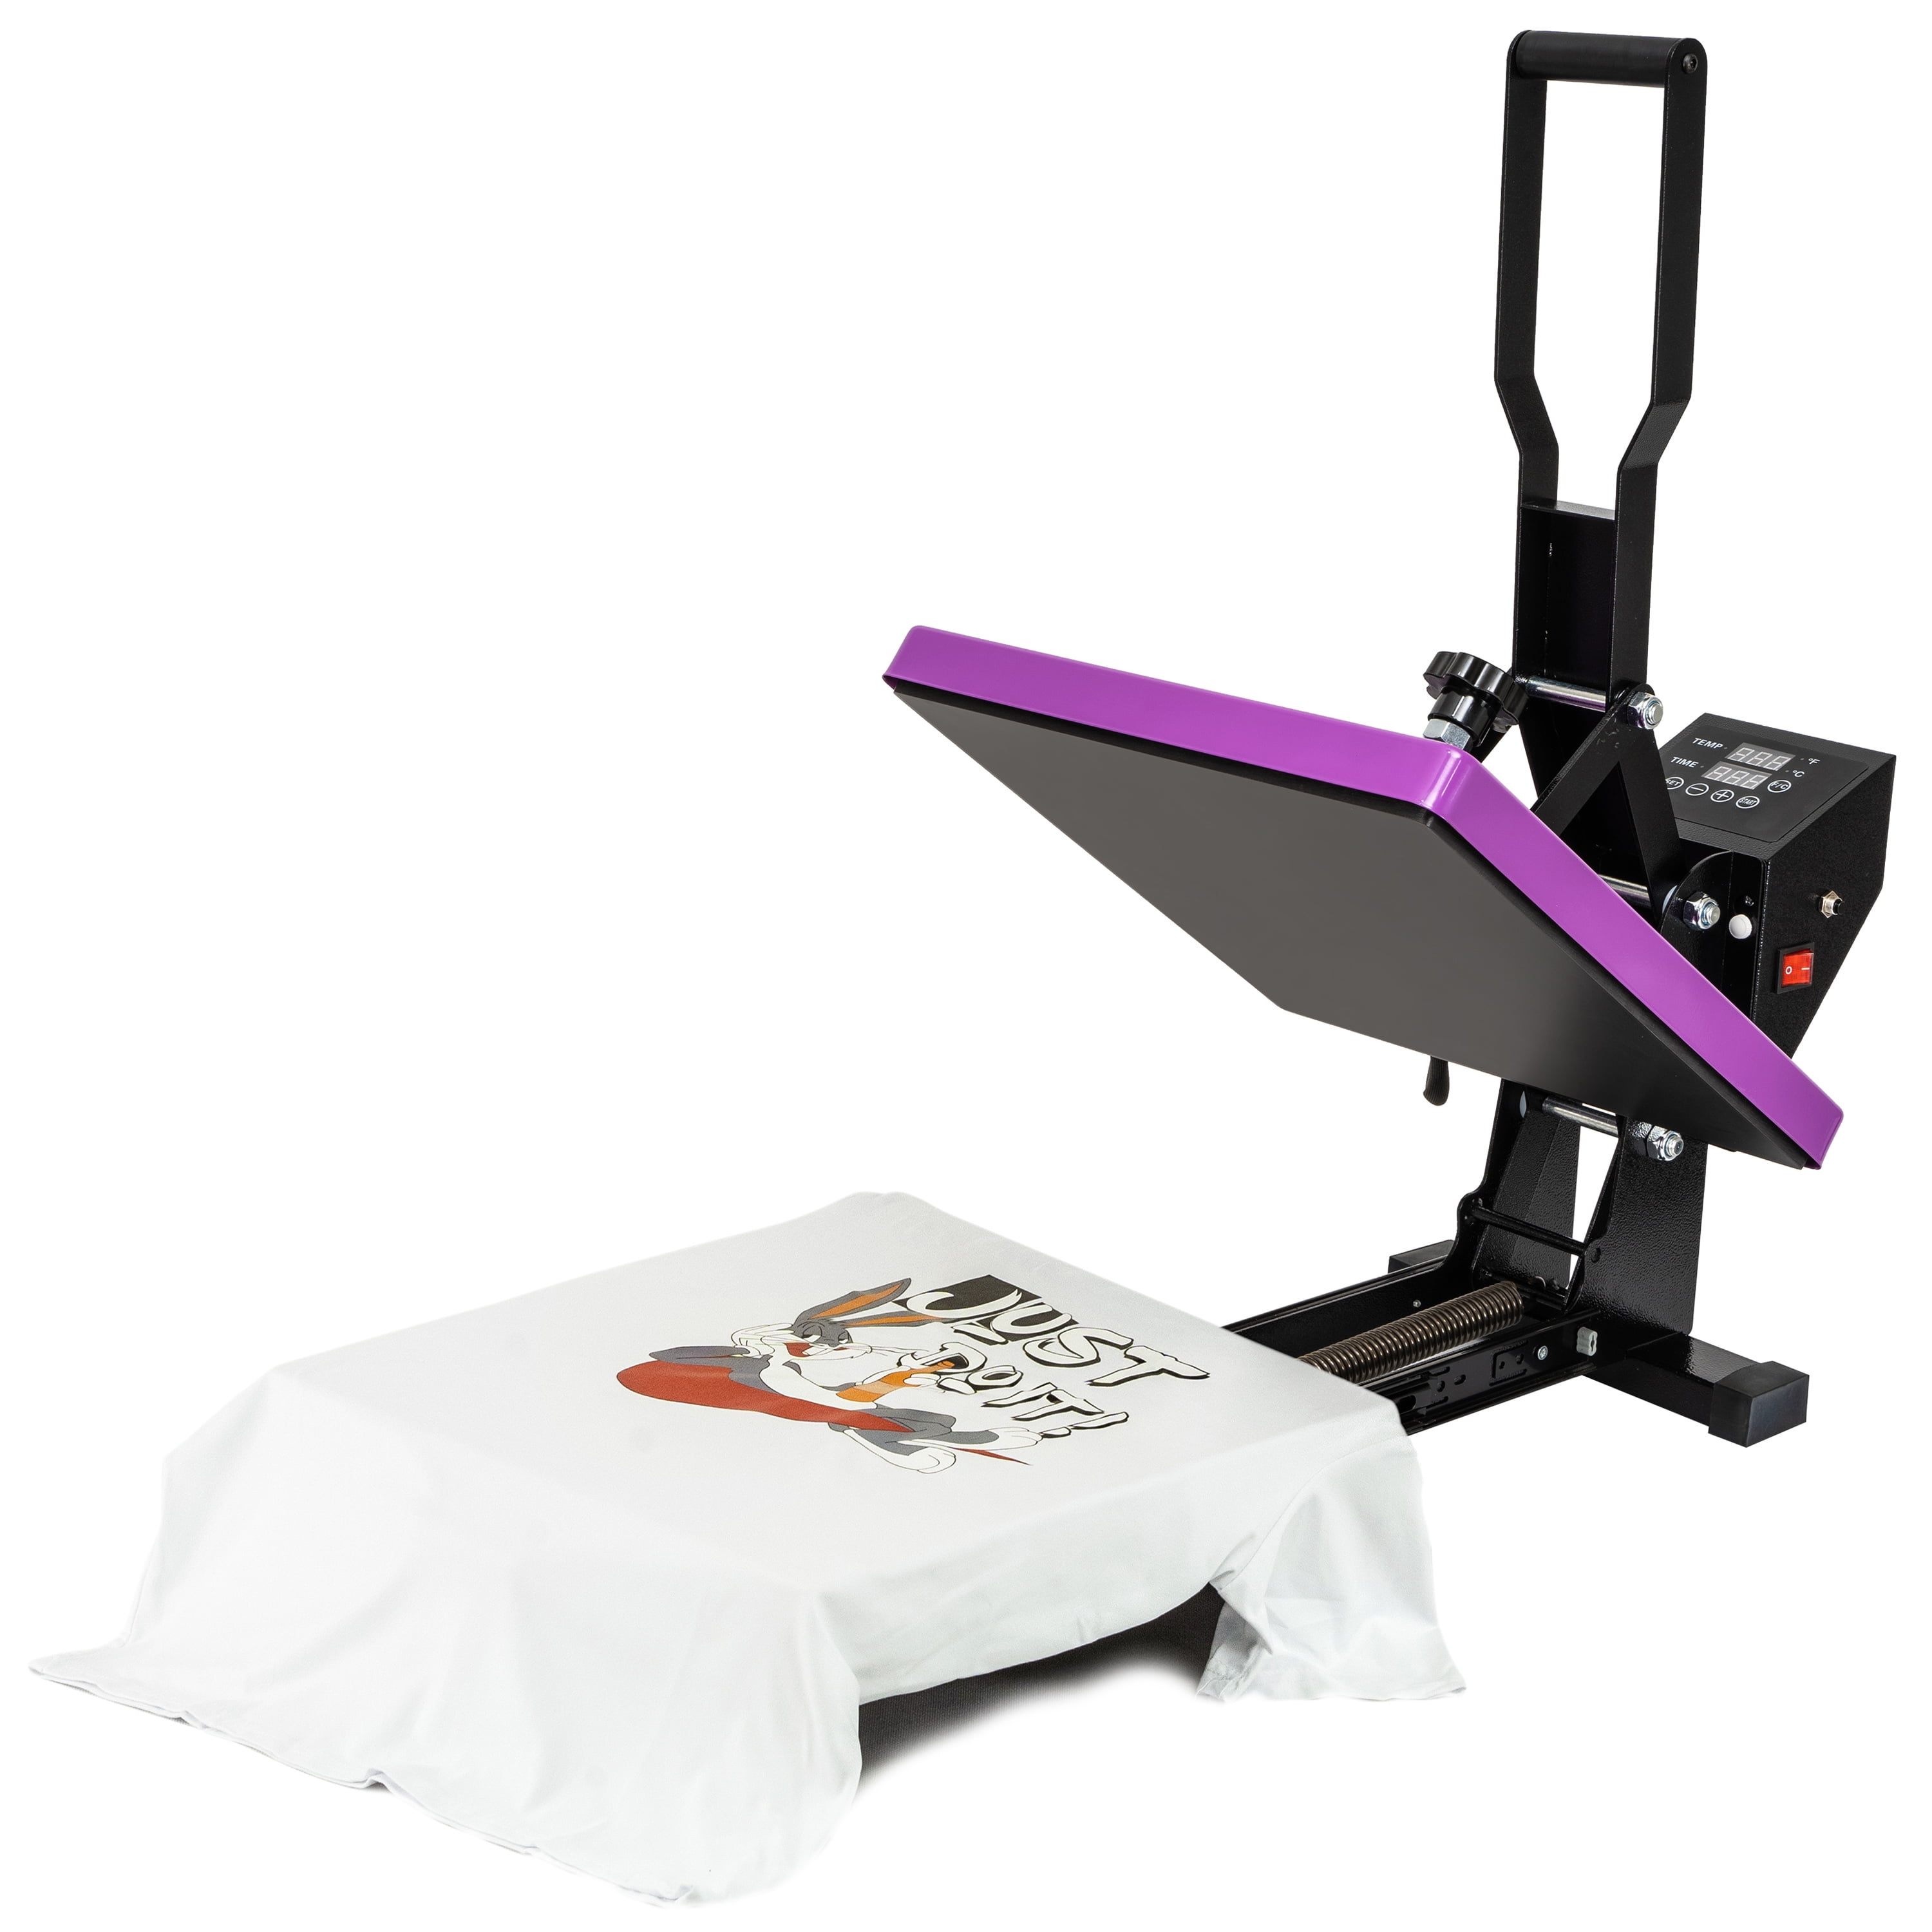  SUPER DEAL PRO 15 X 15 Digital Heat Press Machine Industrial  Quality Clamshell Sublimation Transfer Machine with Two Teflon Sheets for  T-Shirt, 110V : Arts, Crafts & Sewing